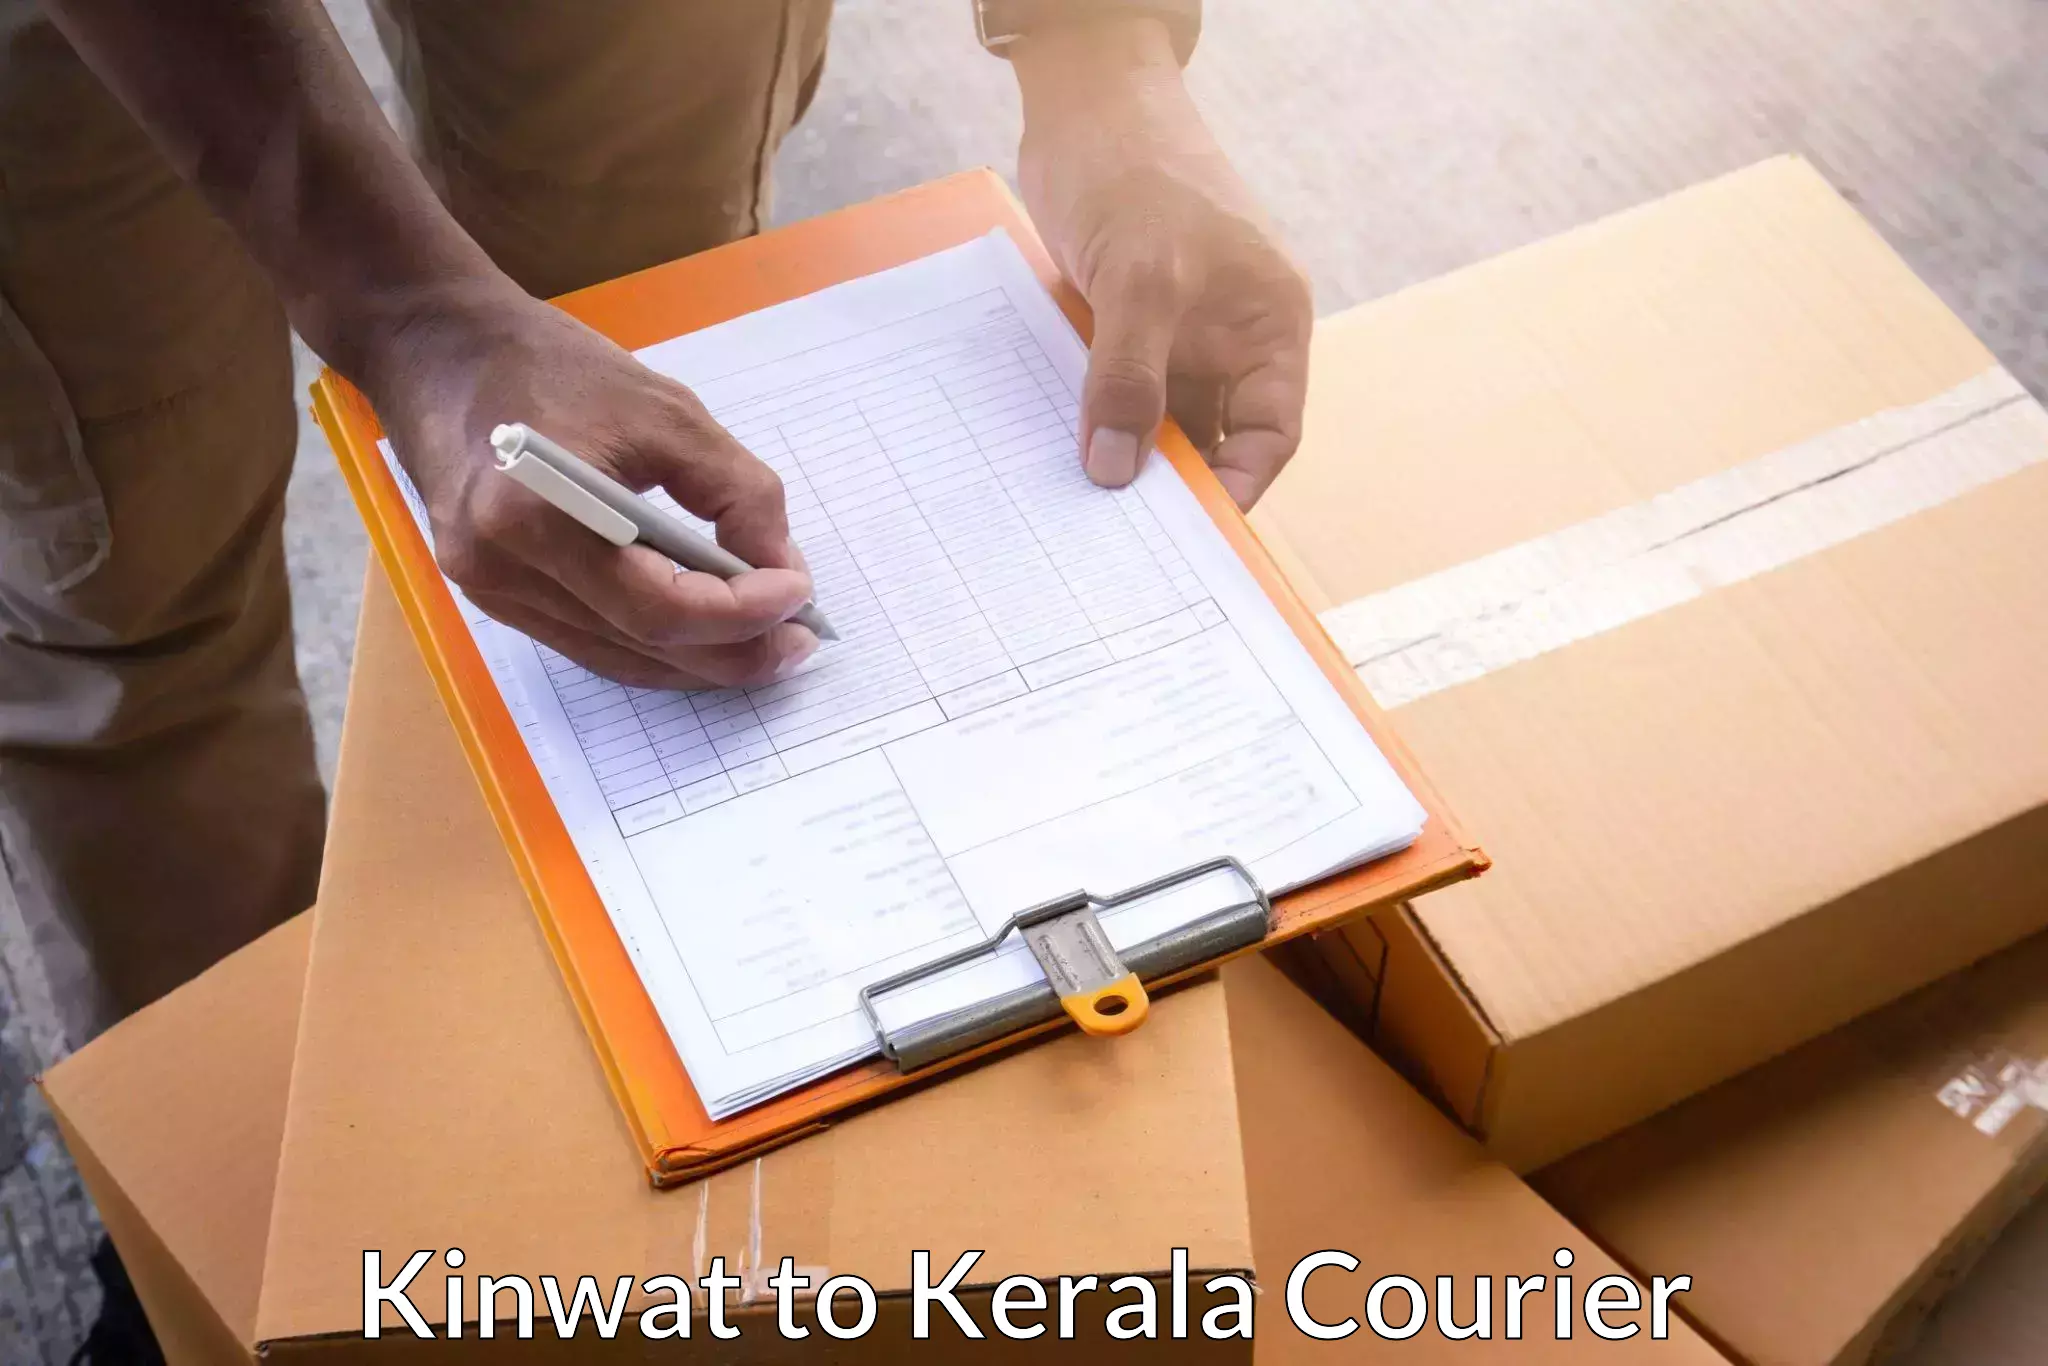 Reliable delivery network Kinwat to Thrissur